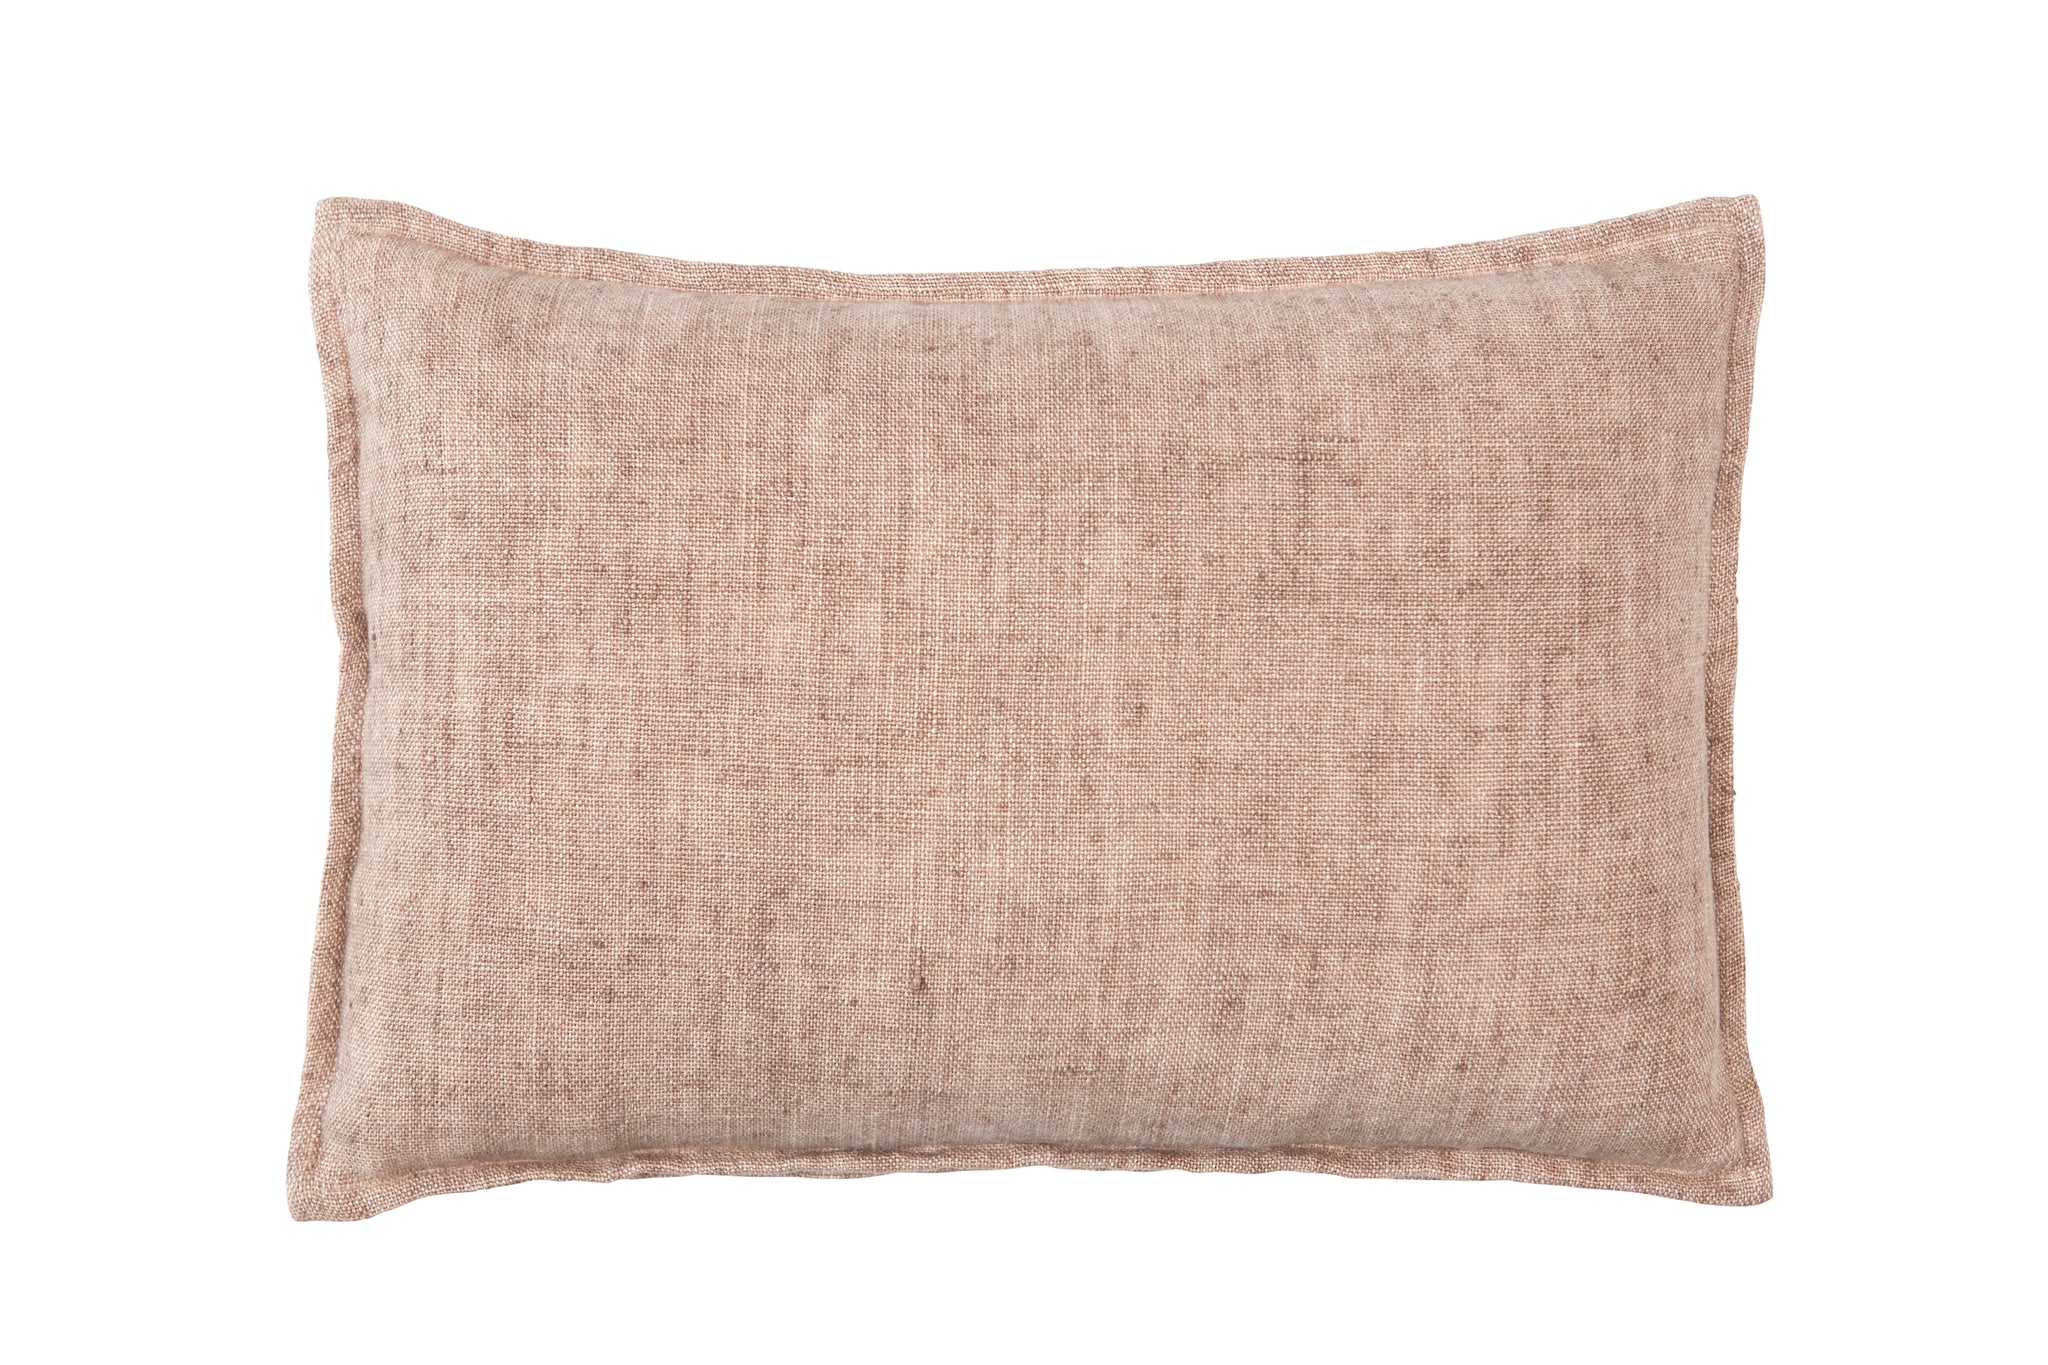 Lene Bjerre Rikke Cushion filled with Duck feathers - 60x40cm